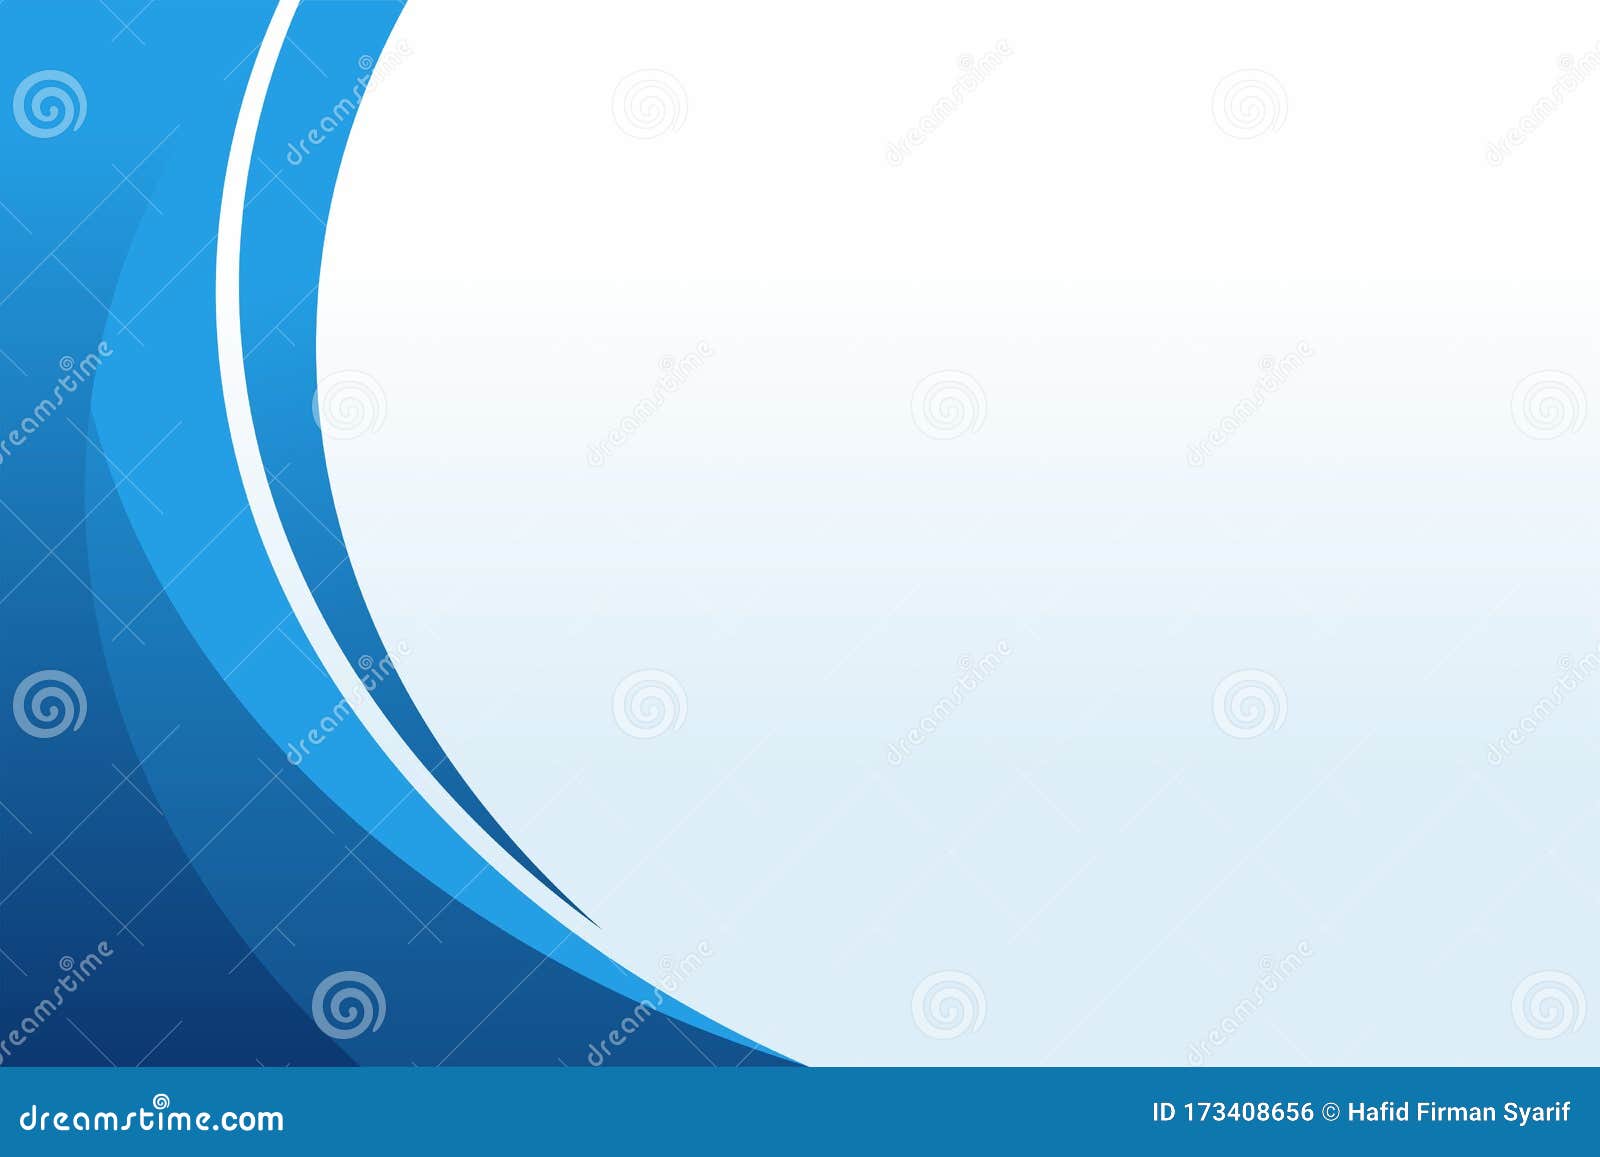 Simple Abstract Blue and White Wave Background Design Template Vector Stock  Vector - Illustration of decoration, lights: 173408656